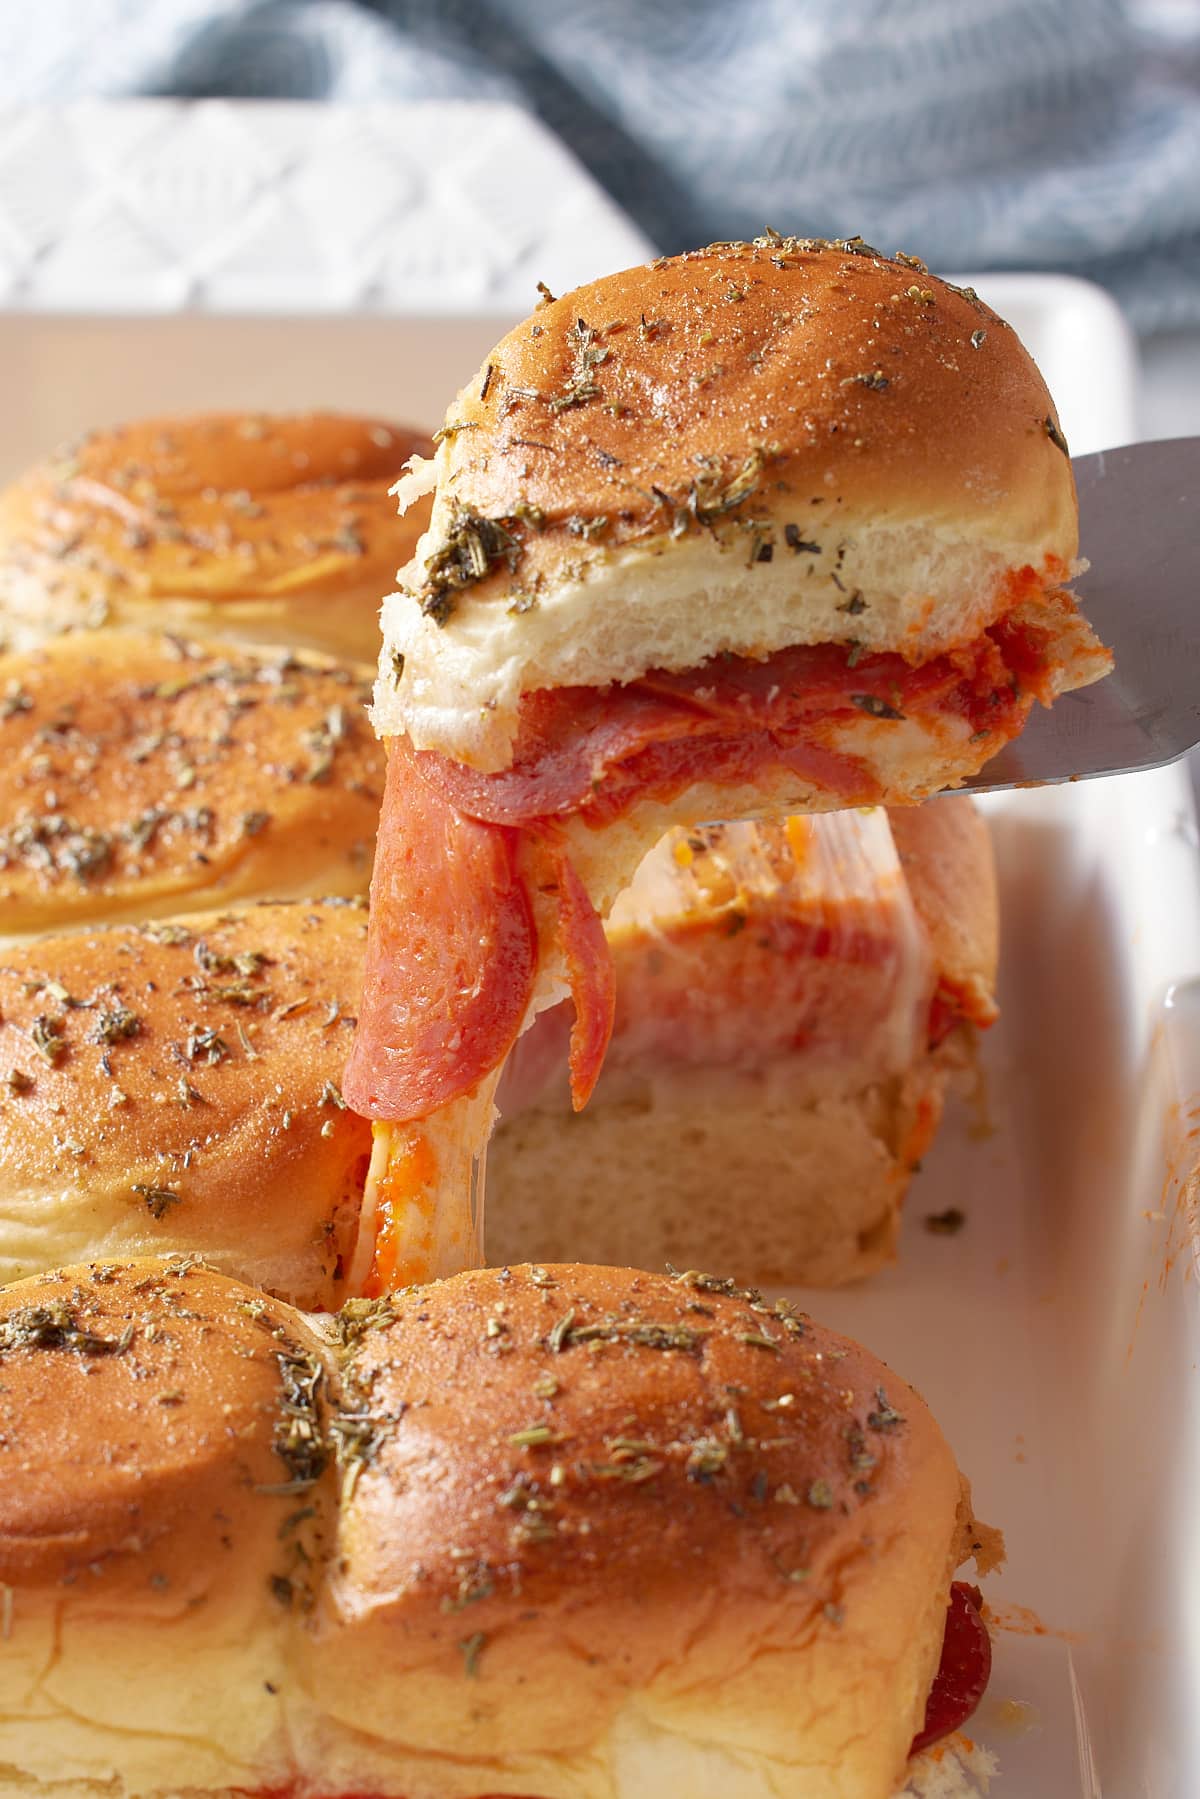 portion of pizza sliders on a palate knife